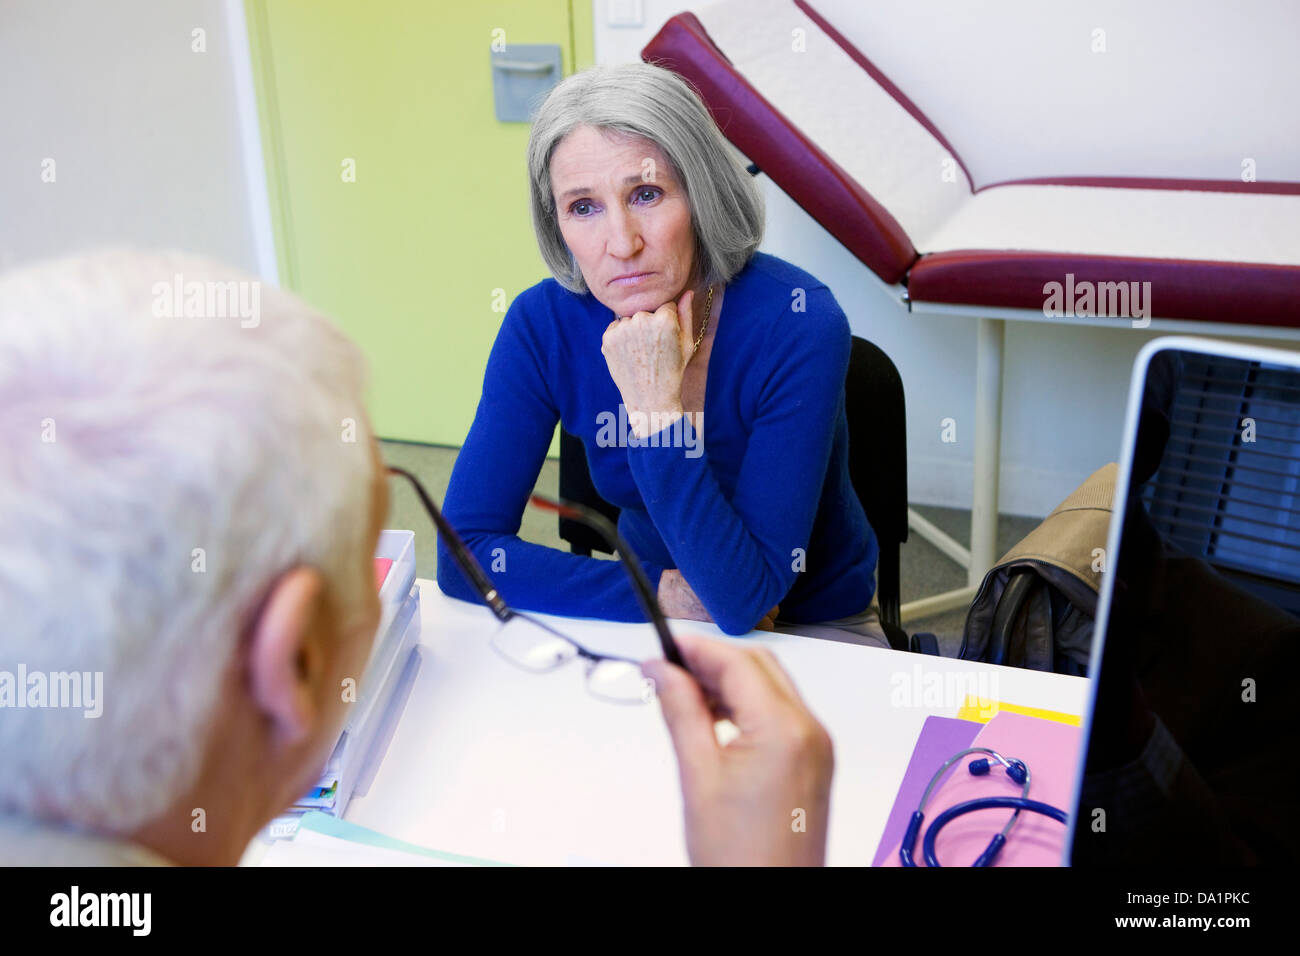 ELDERLY PERSON CONSULTING, DIALOGUE Stock Photo